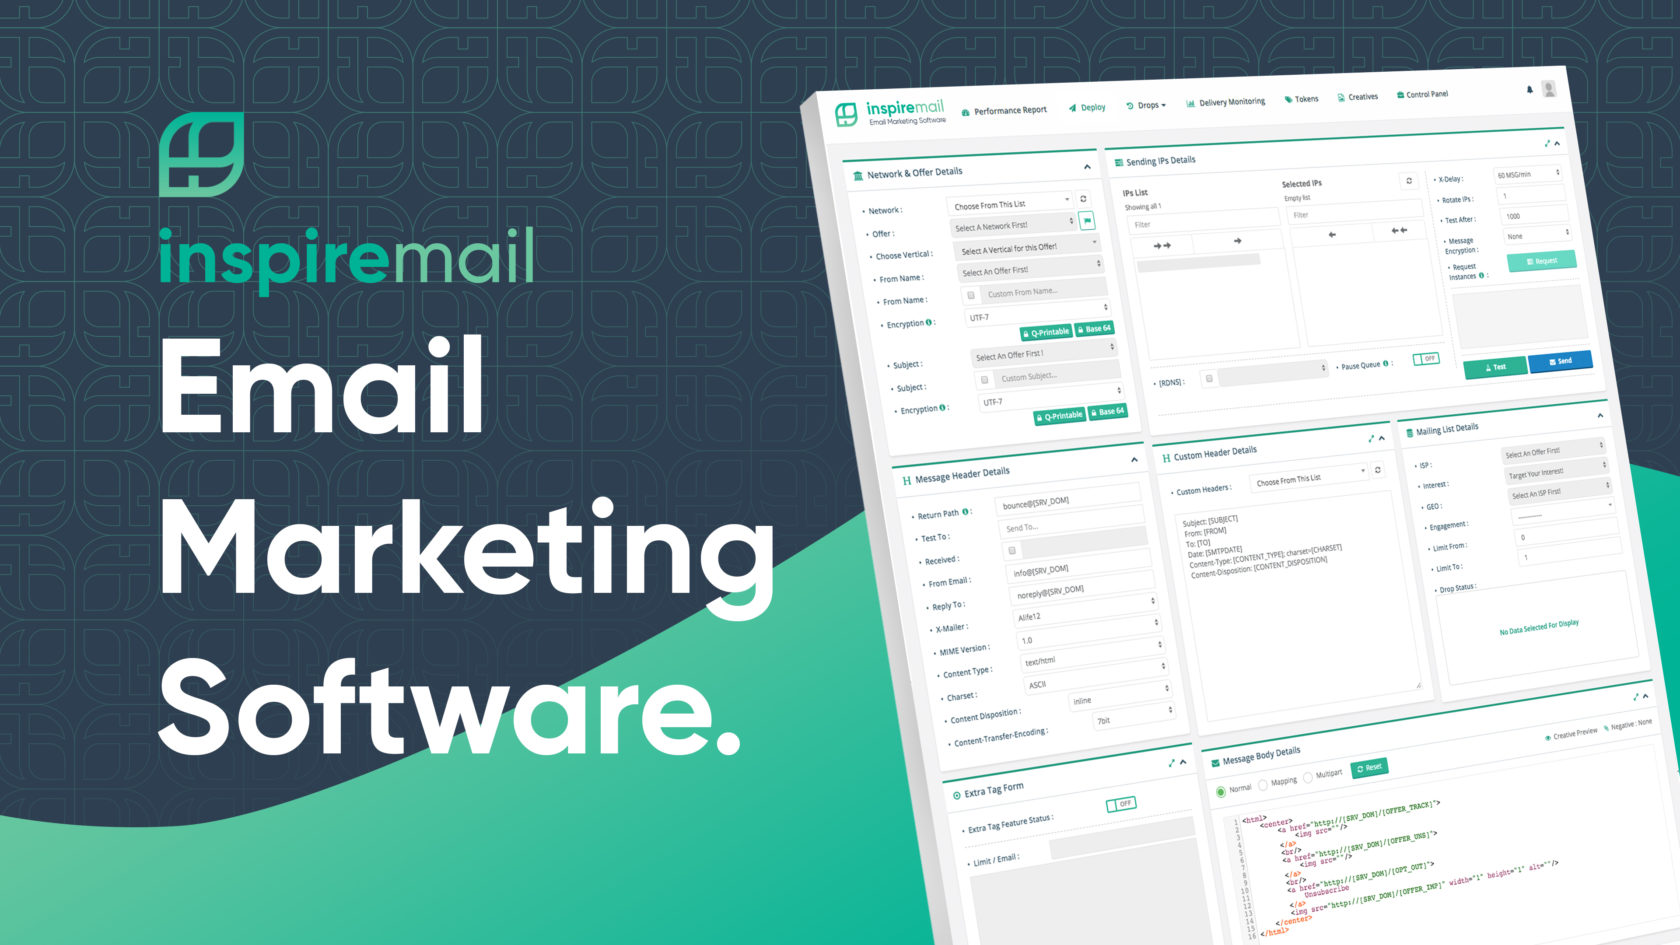 INSPIREMAIL email marketing software